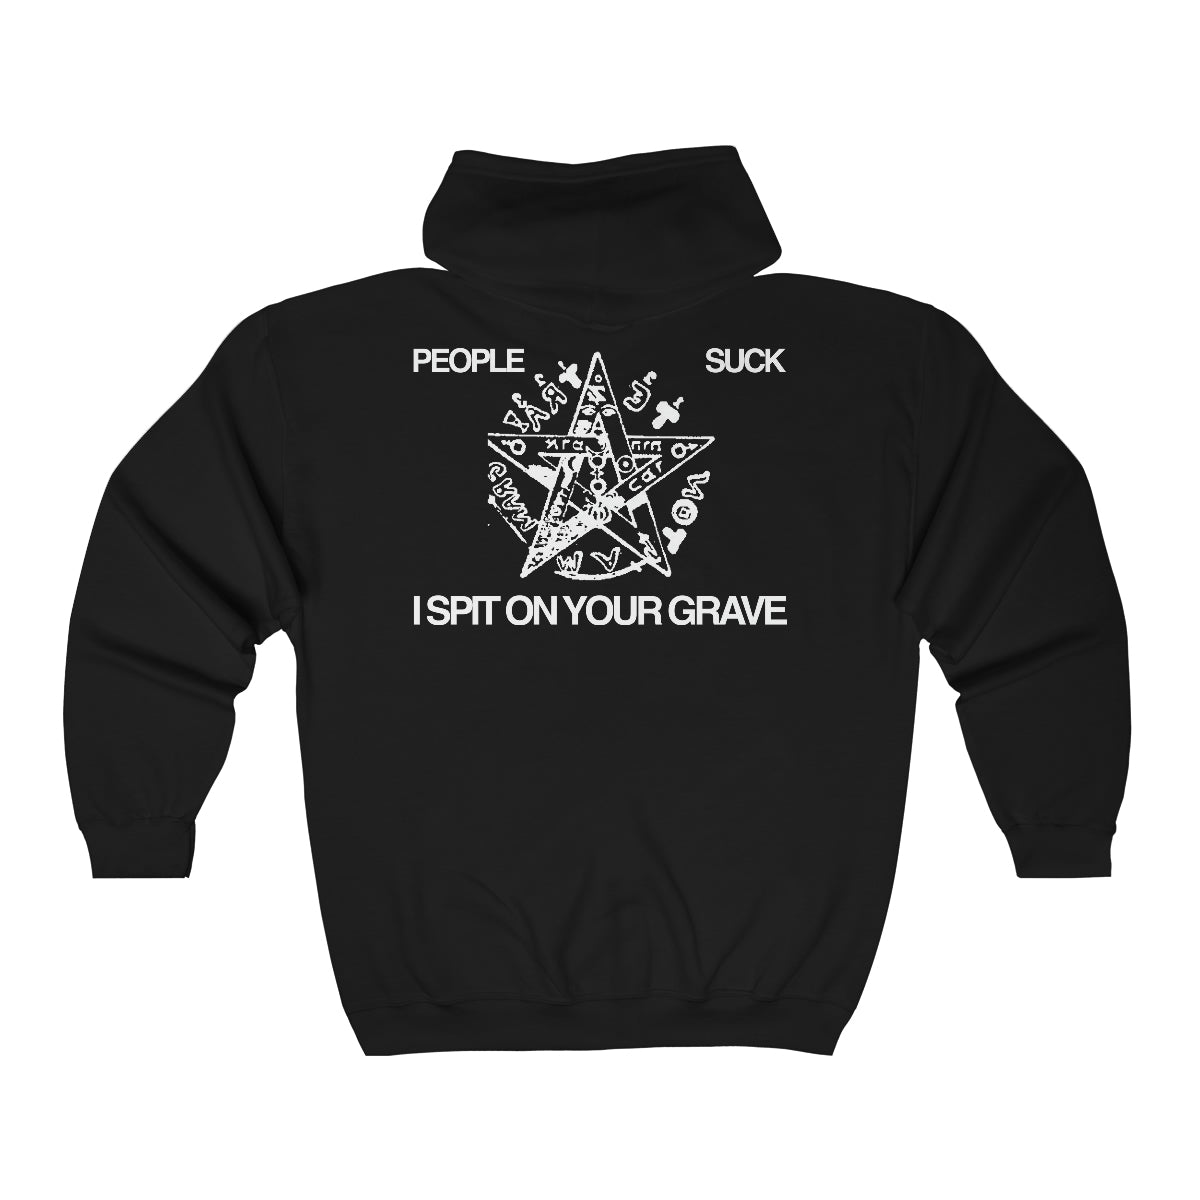 I Spit on your Grave Vintage Zip 2 Sided Hoodie